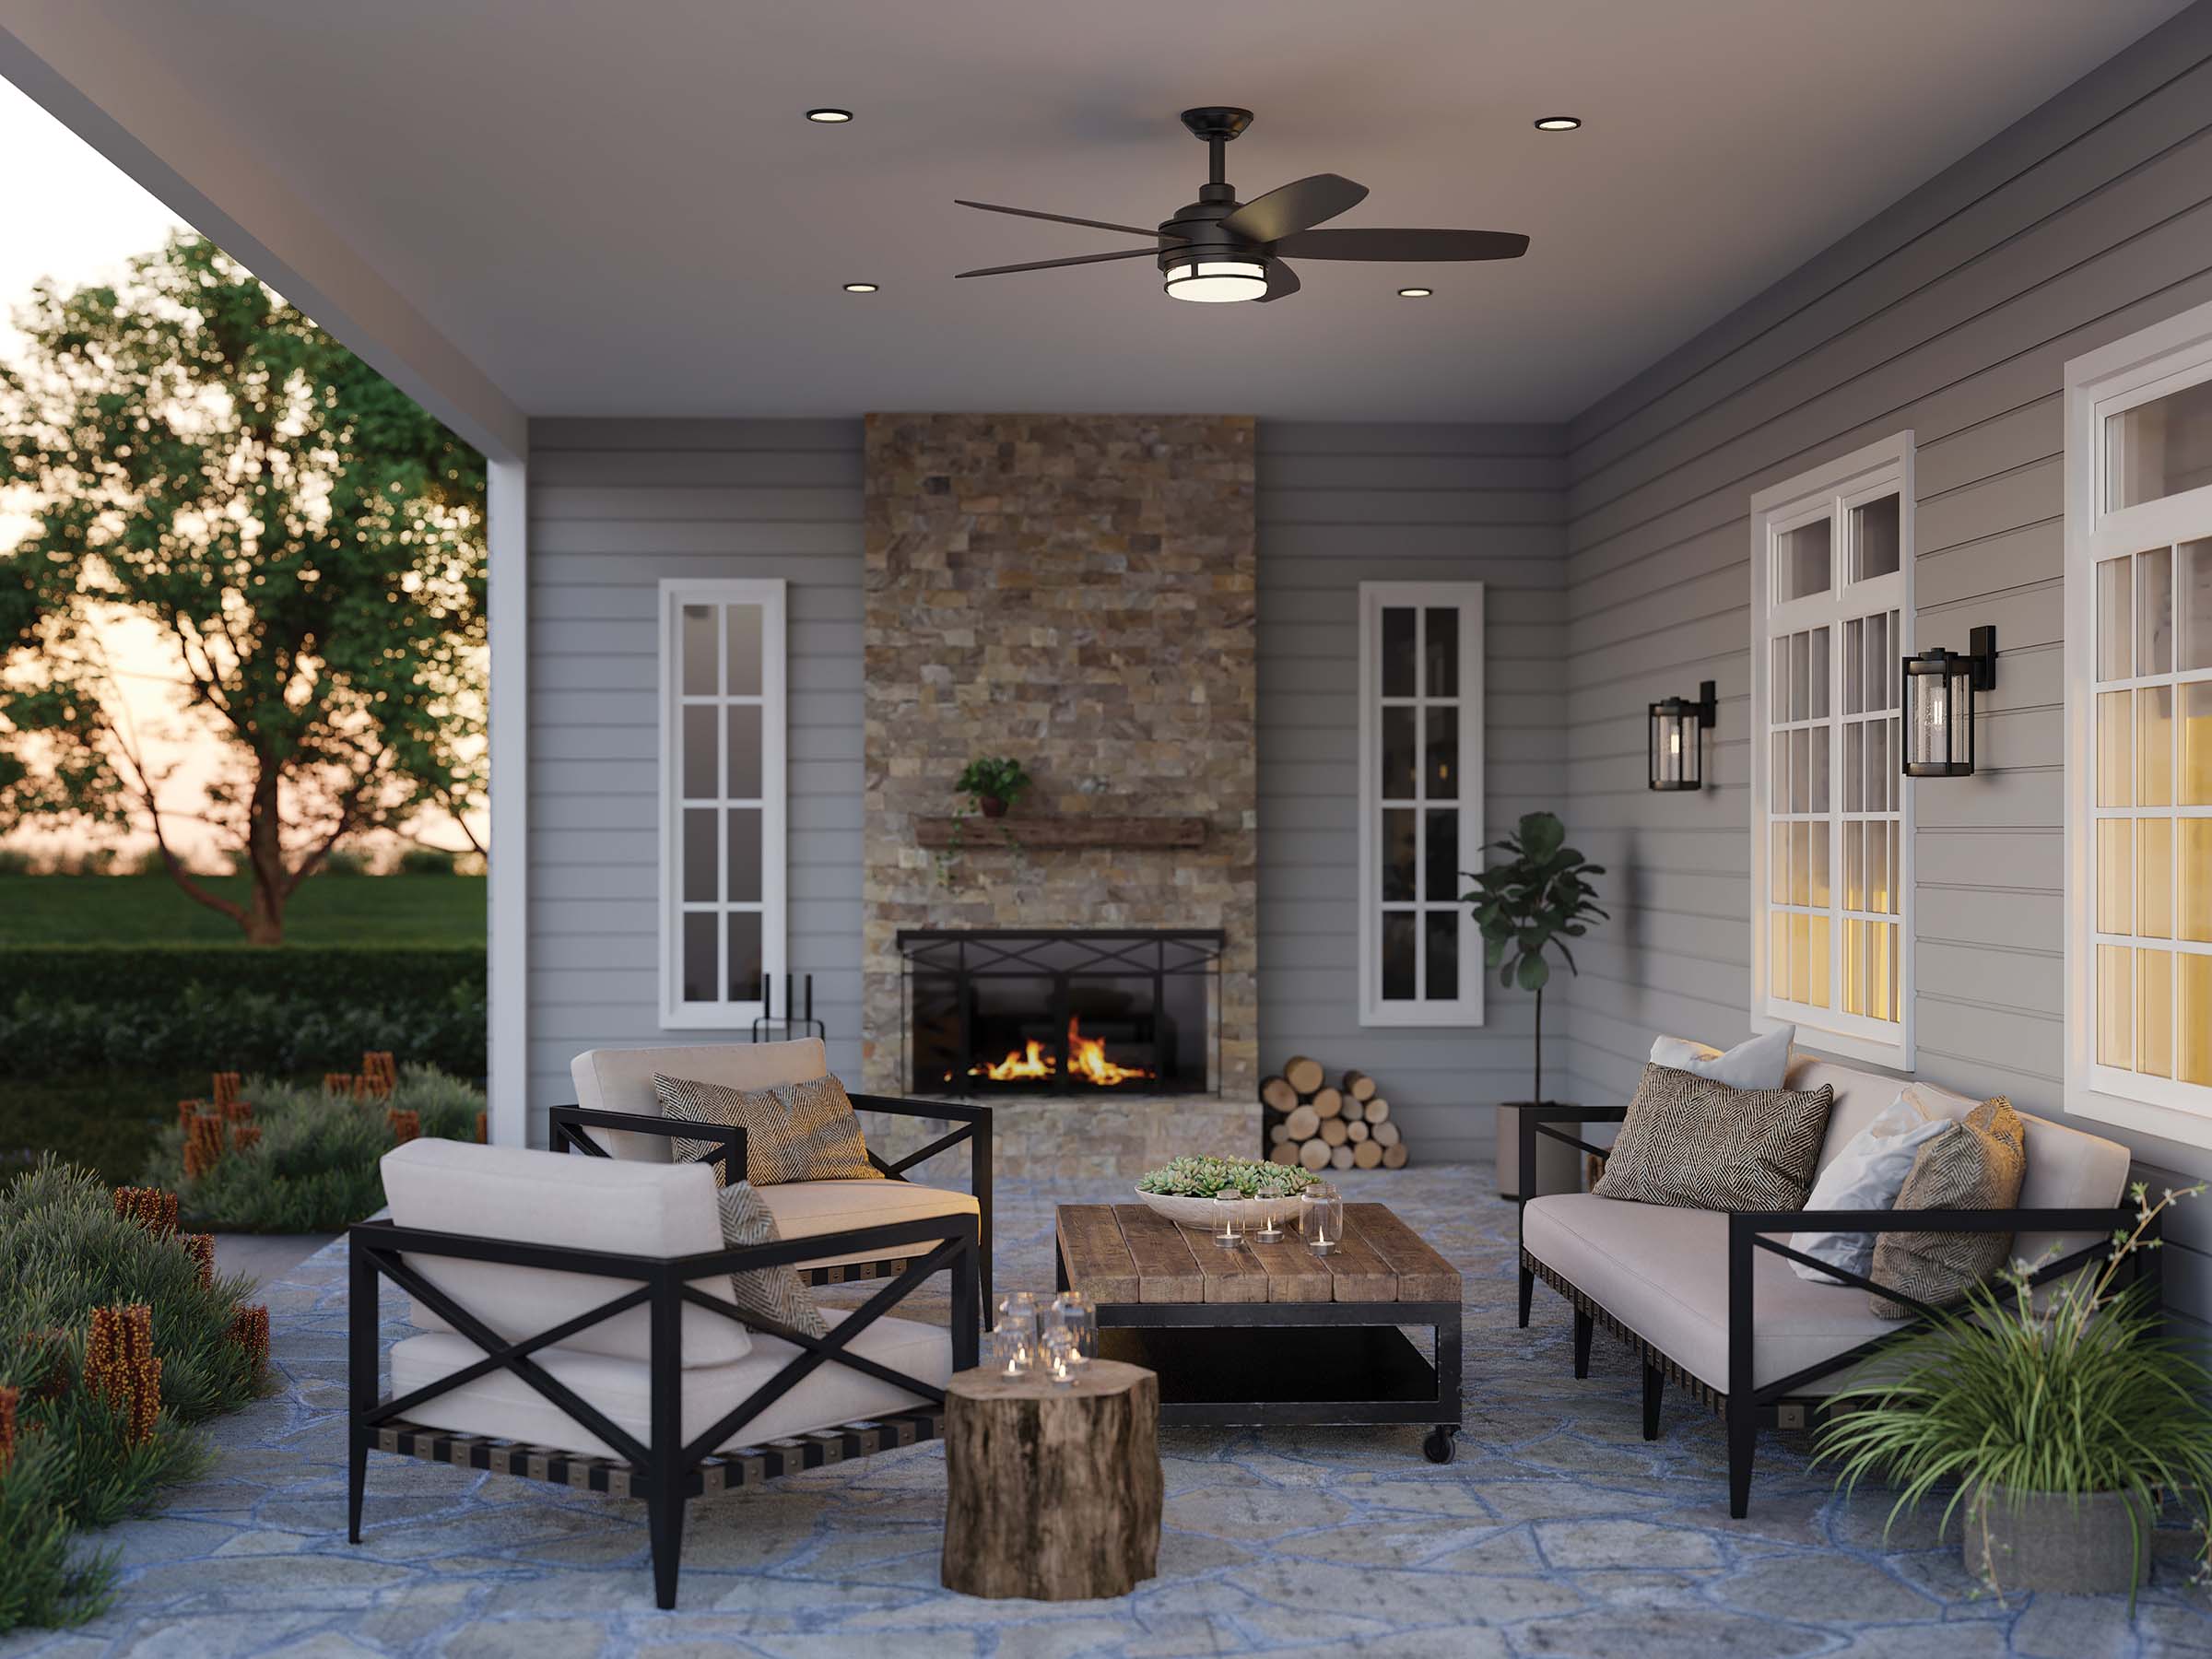 5 Exterior Design Tips for Your Outdoor Living Spaces